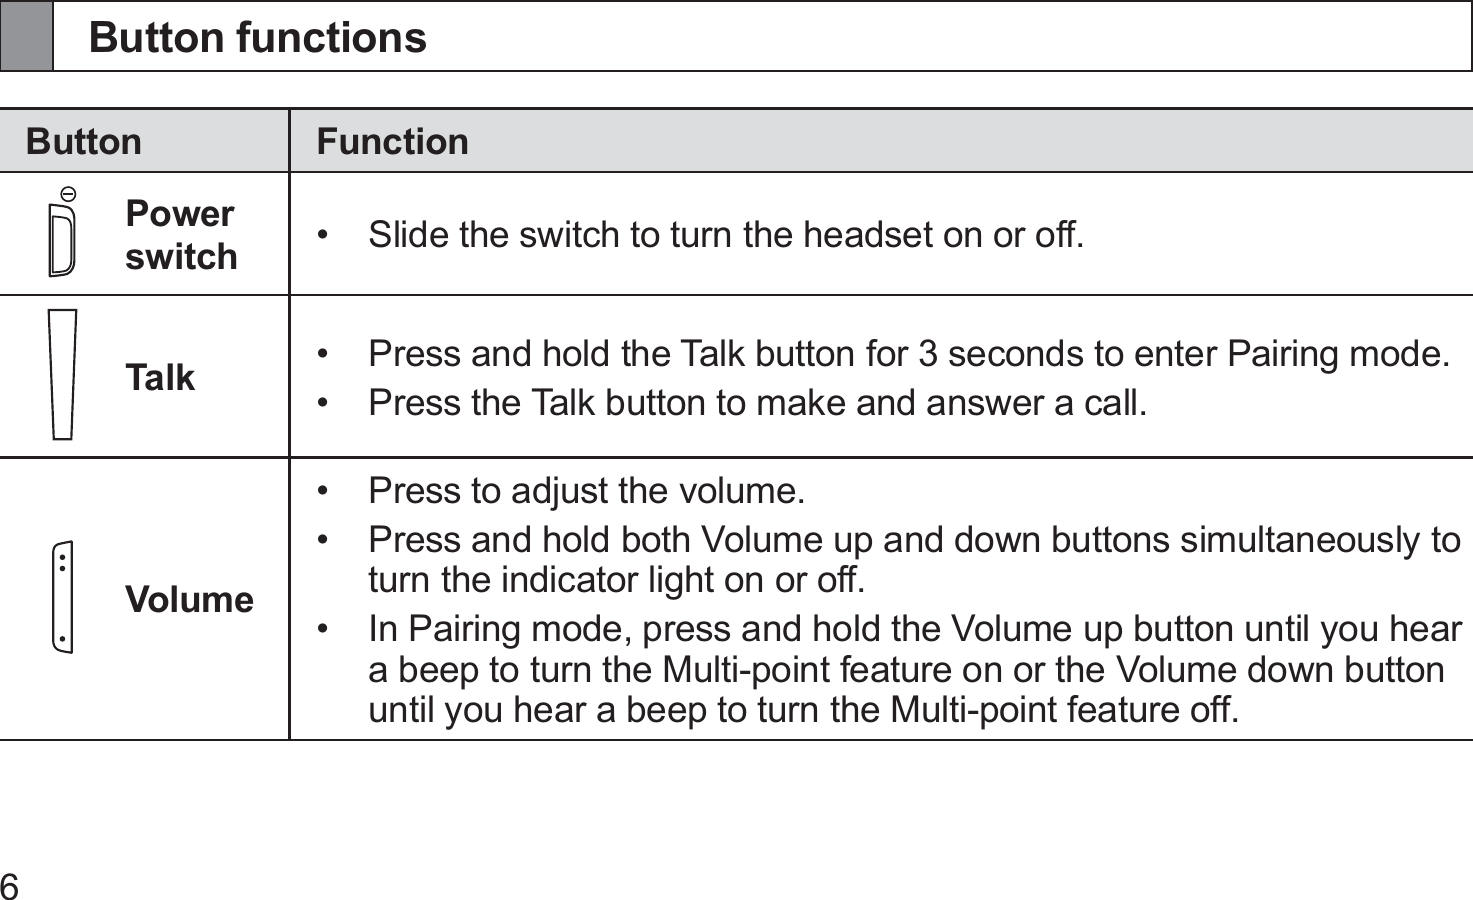 6Button functionsButton FunctionPower switch Slide the switch to turn the headset on or off.• Talk Press and hold the Talk button for 3 seconds to enter Pairing mode.• Press the Talk button to make and answer a call.• VolumePress to adjust the volume.• Press and hold both Volume up and down buttons simultaneously to • turn the indicator light on or off.In Pairing mode, press and hold the Volume up button until you hear • a beep to turn the Multi-point feature on or the Volume down button until you hear a beep to turn the Multi-point feature off.